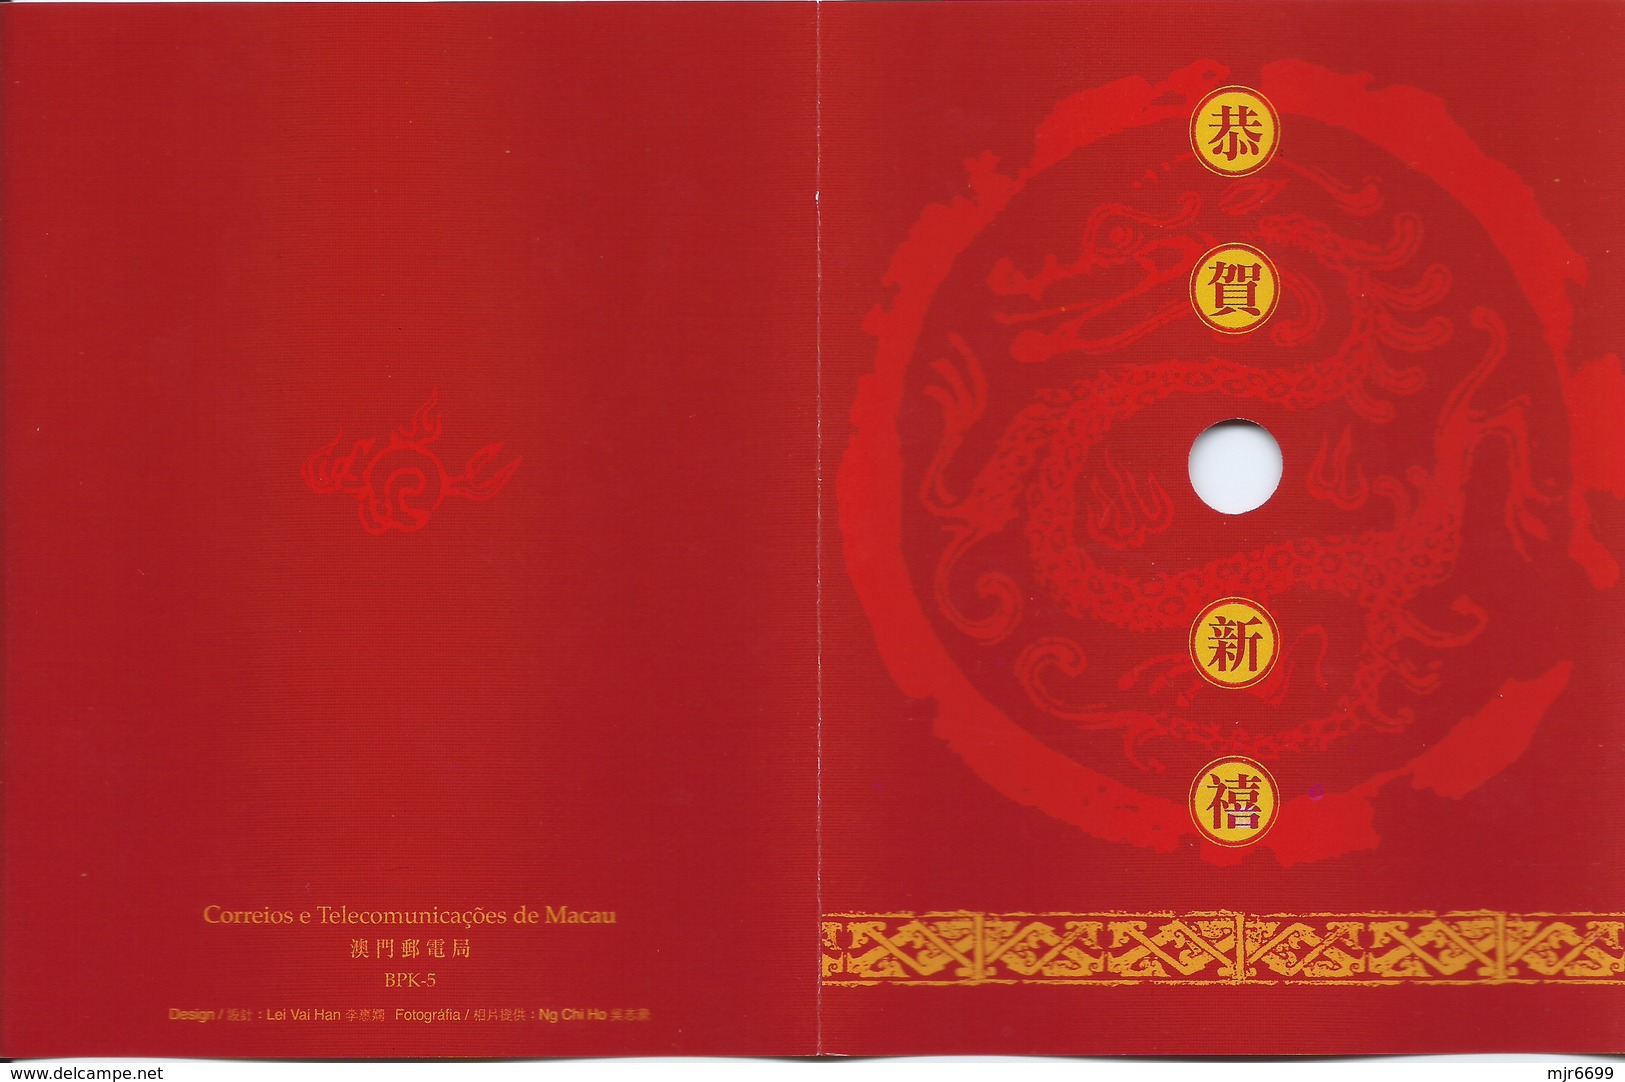 MACAU 1999 NEW YEAR GREETING CARD & POSTAGE PAID COVERLOCAL USAGE, POST OFFICE CODE #BPK005 - Postal Stationery